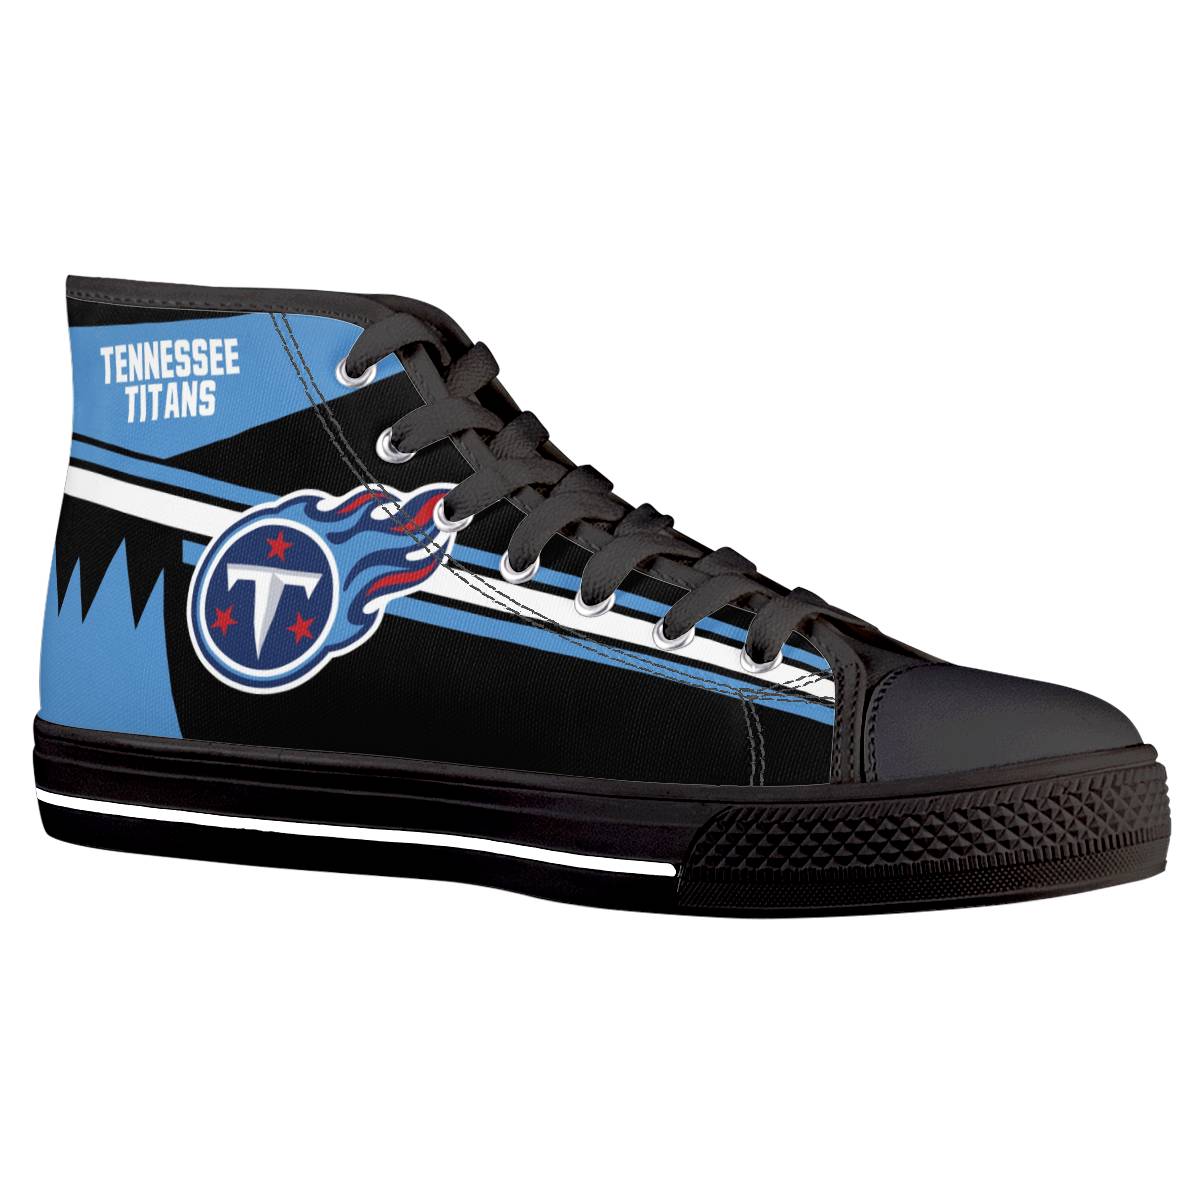 Women's Tennessee Titans High Top Canvas Sneakers 002